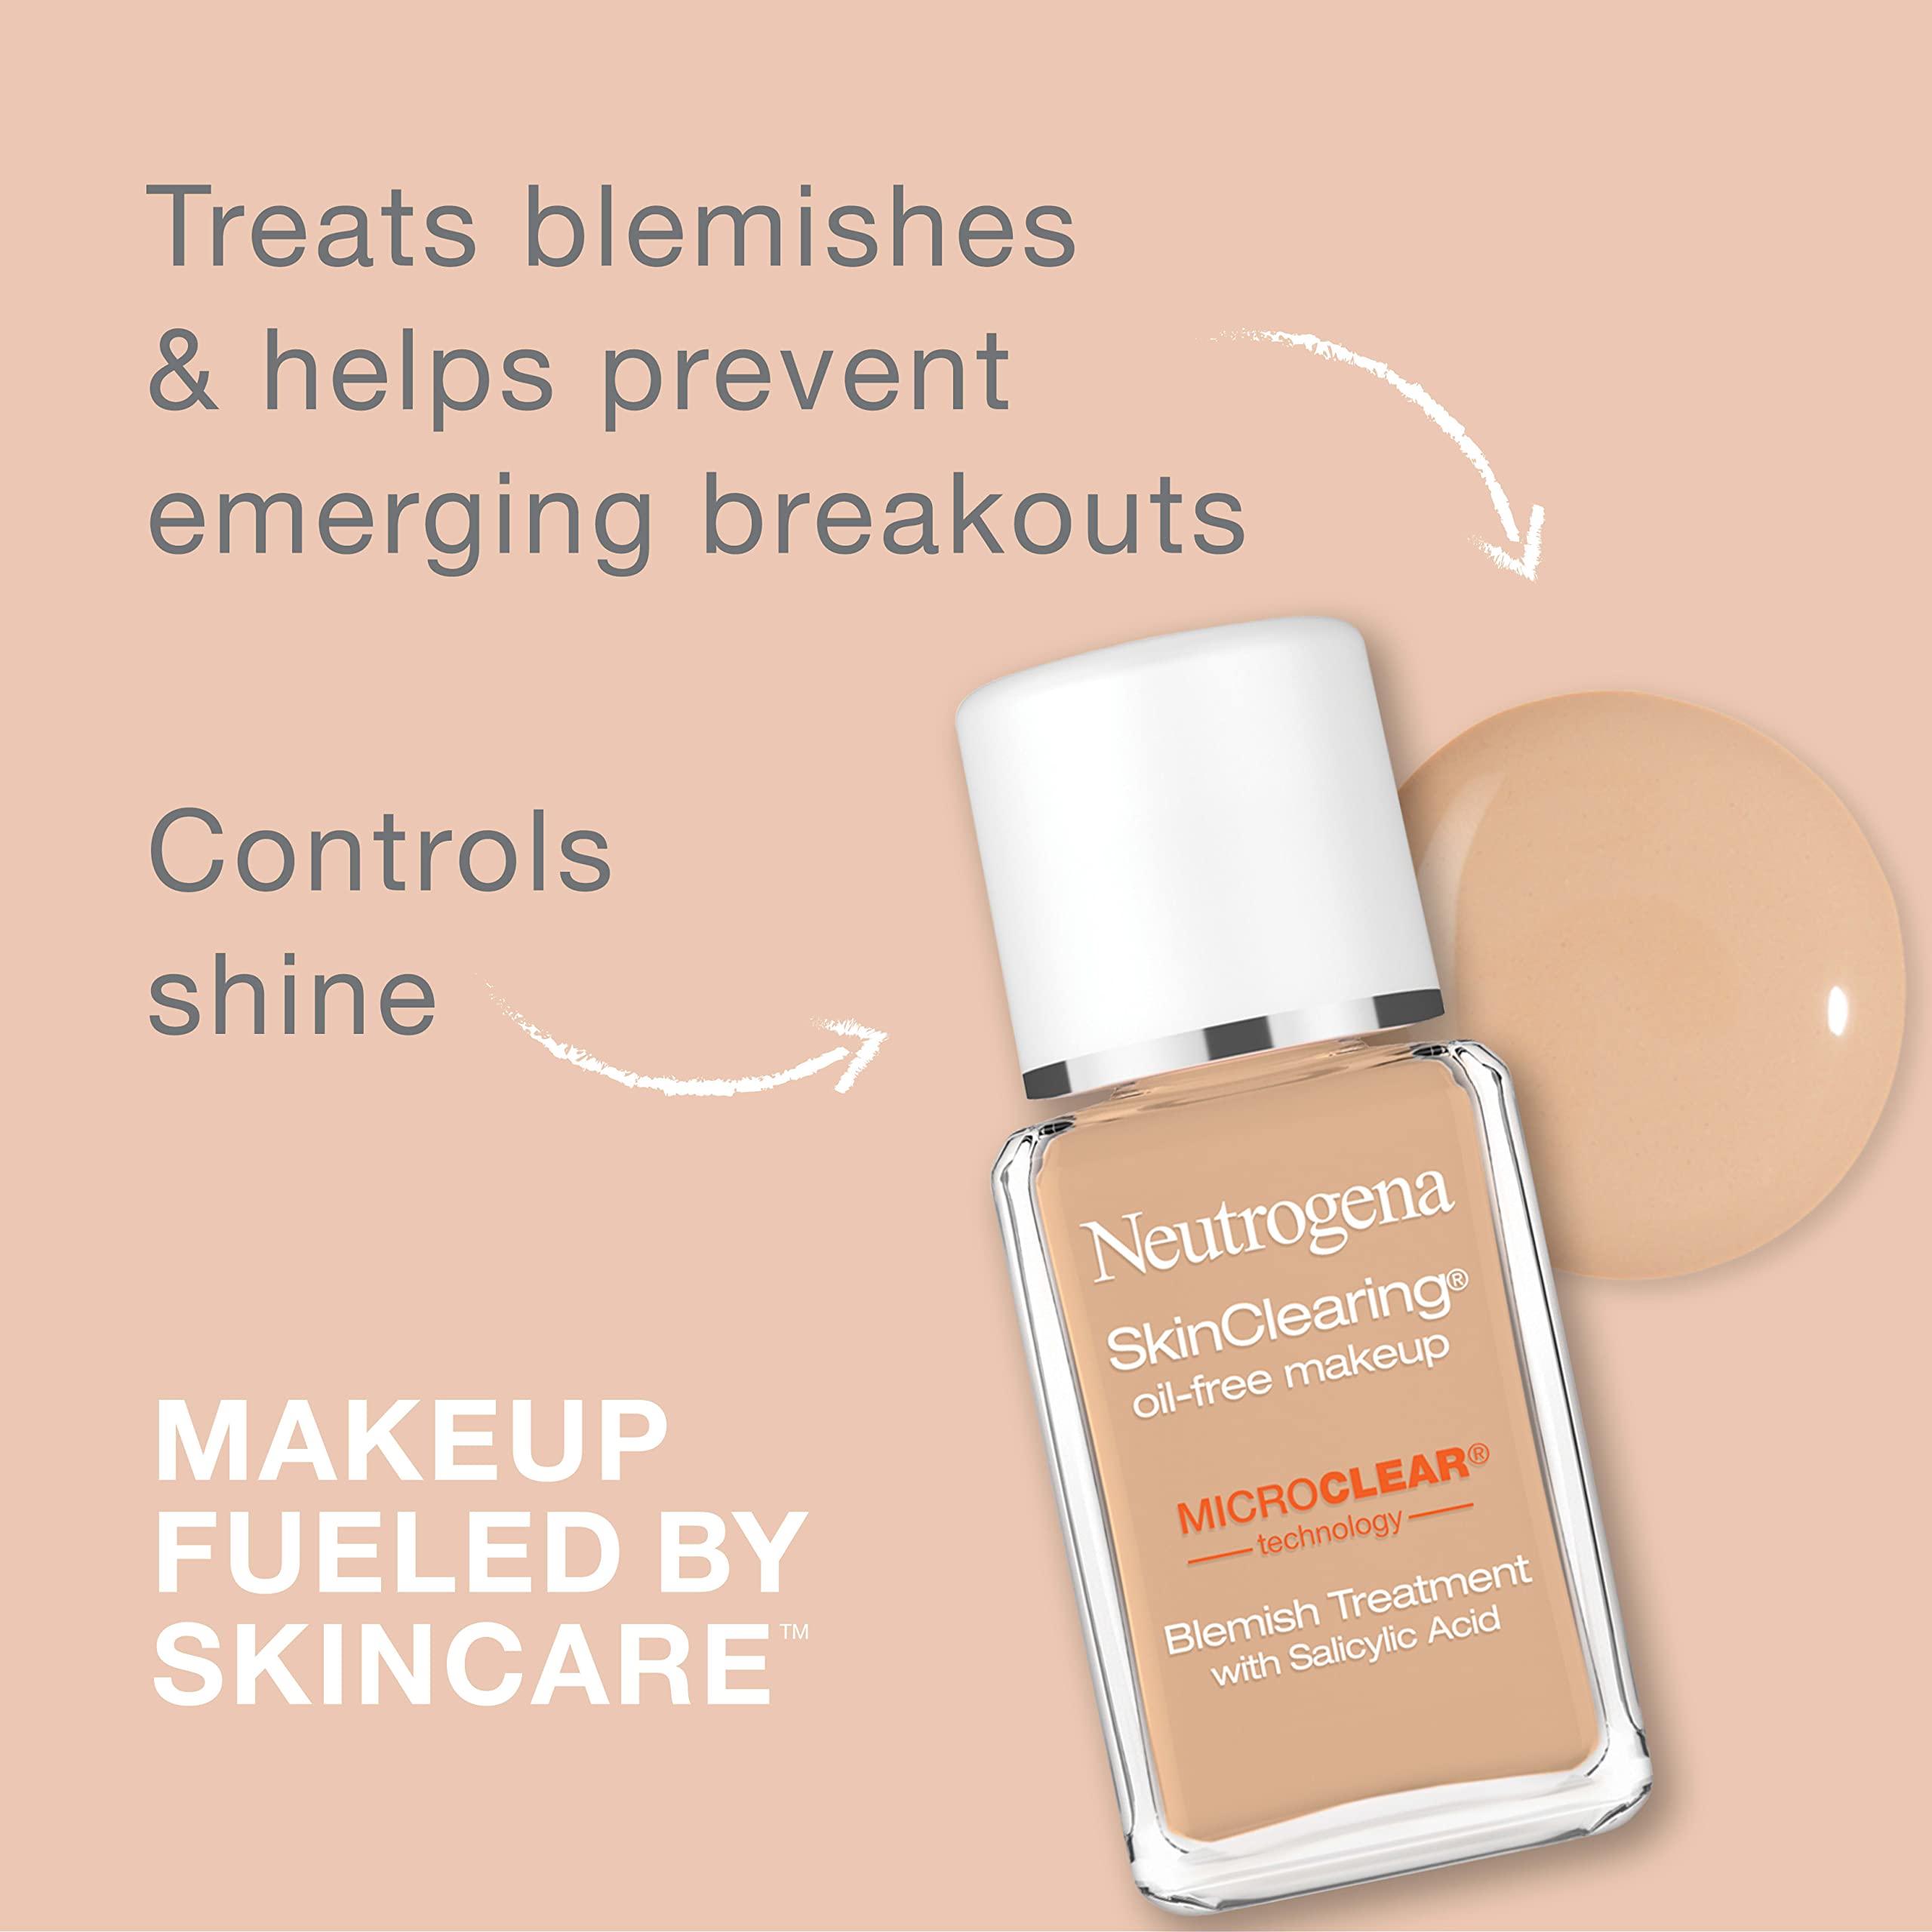 Neutrogena SkinClearing Oil-Free Acne and Blemish Fighting Liquid Foundation with.5% Salicylic Acid Acne Medicine, Shine Controlling Makeup for Acne Prone Skin, 40 Nude, 1 fl. oz